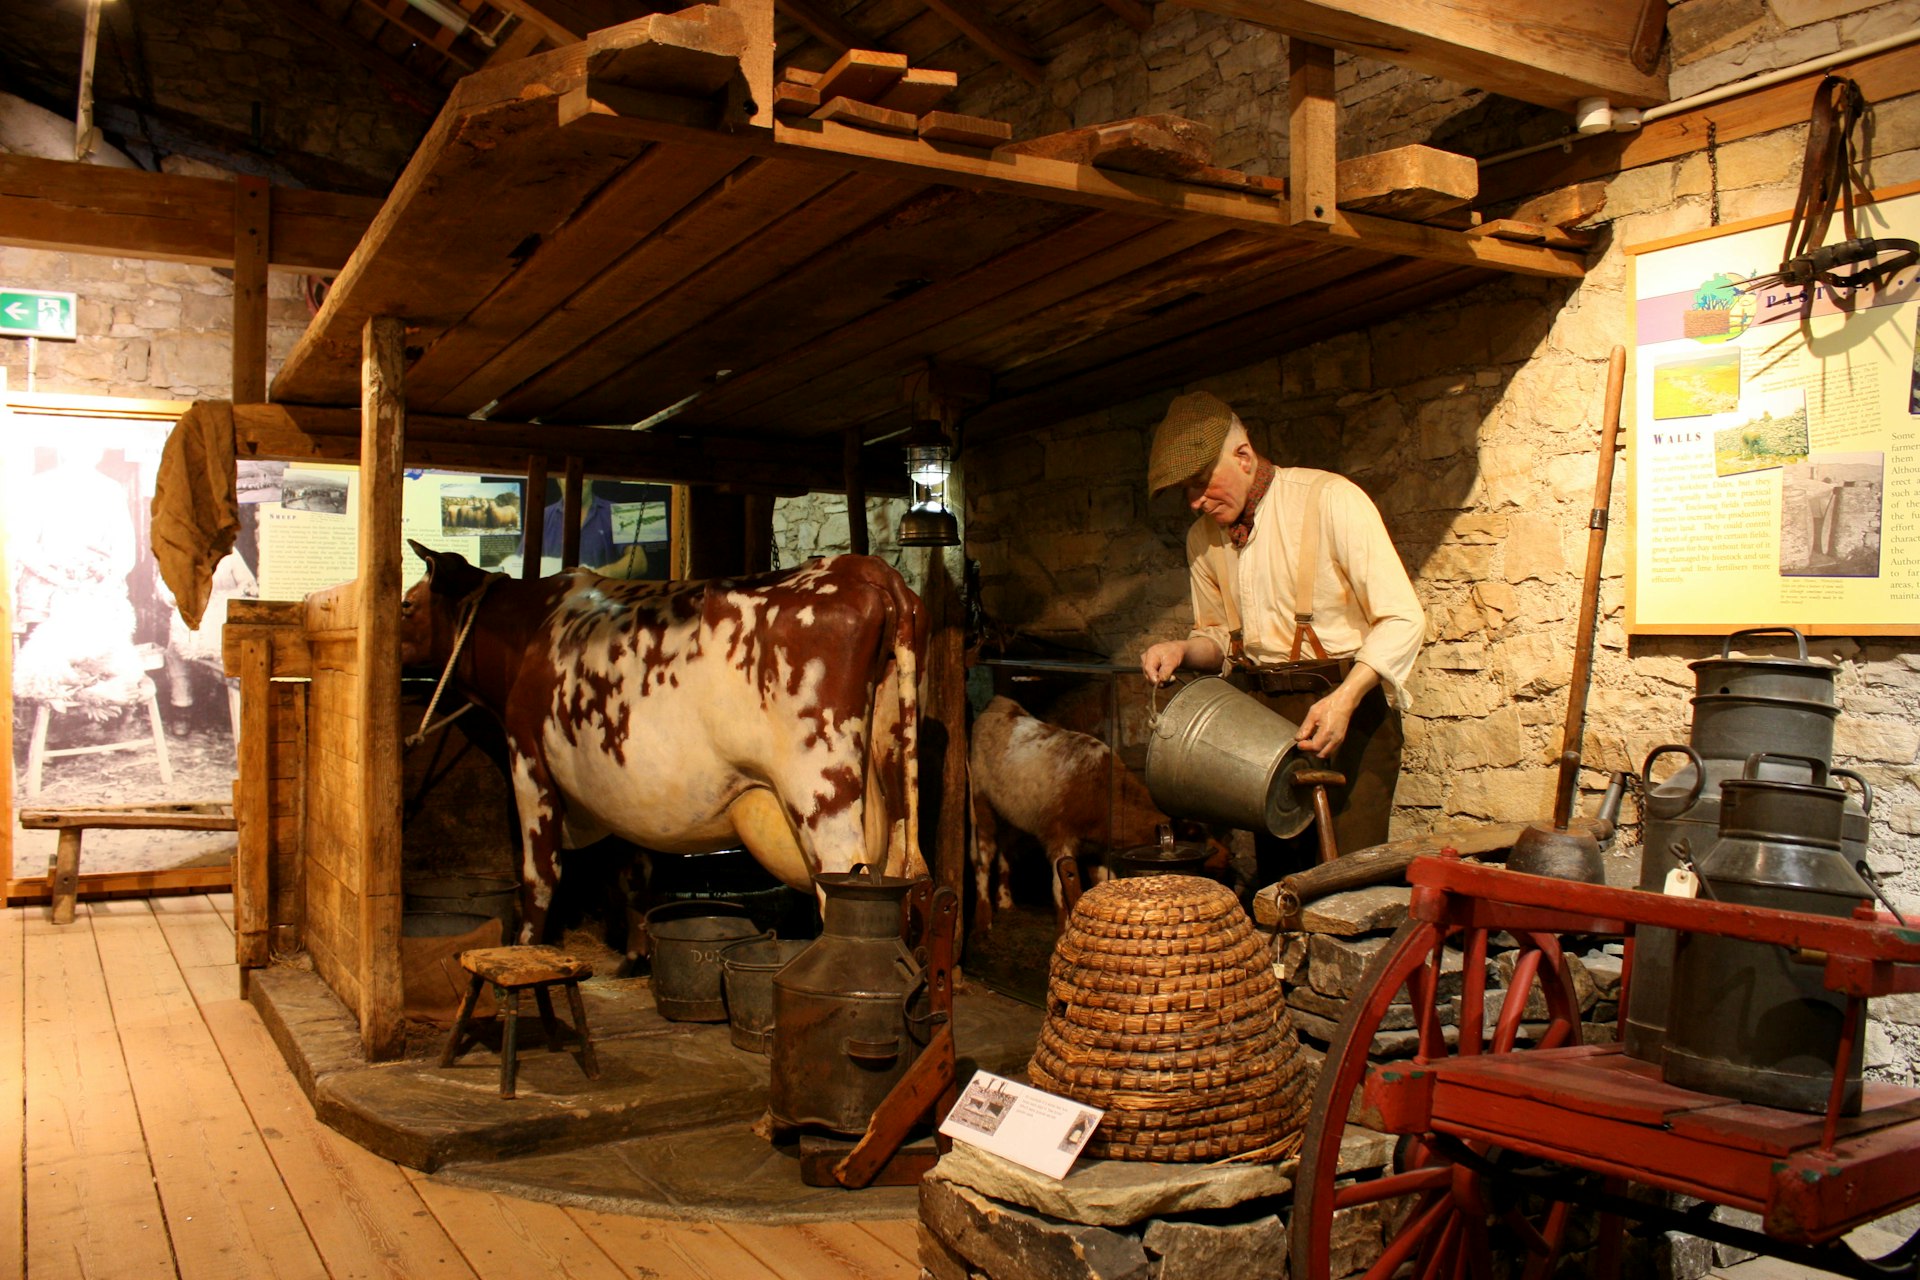 Exhibits on cheesemaking at the Courtyard Dairy